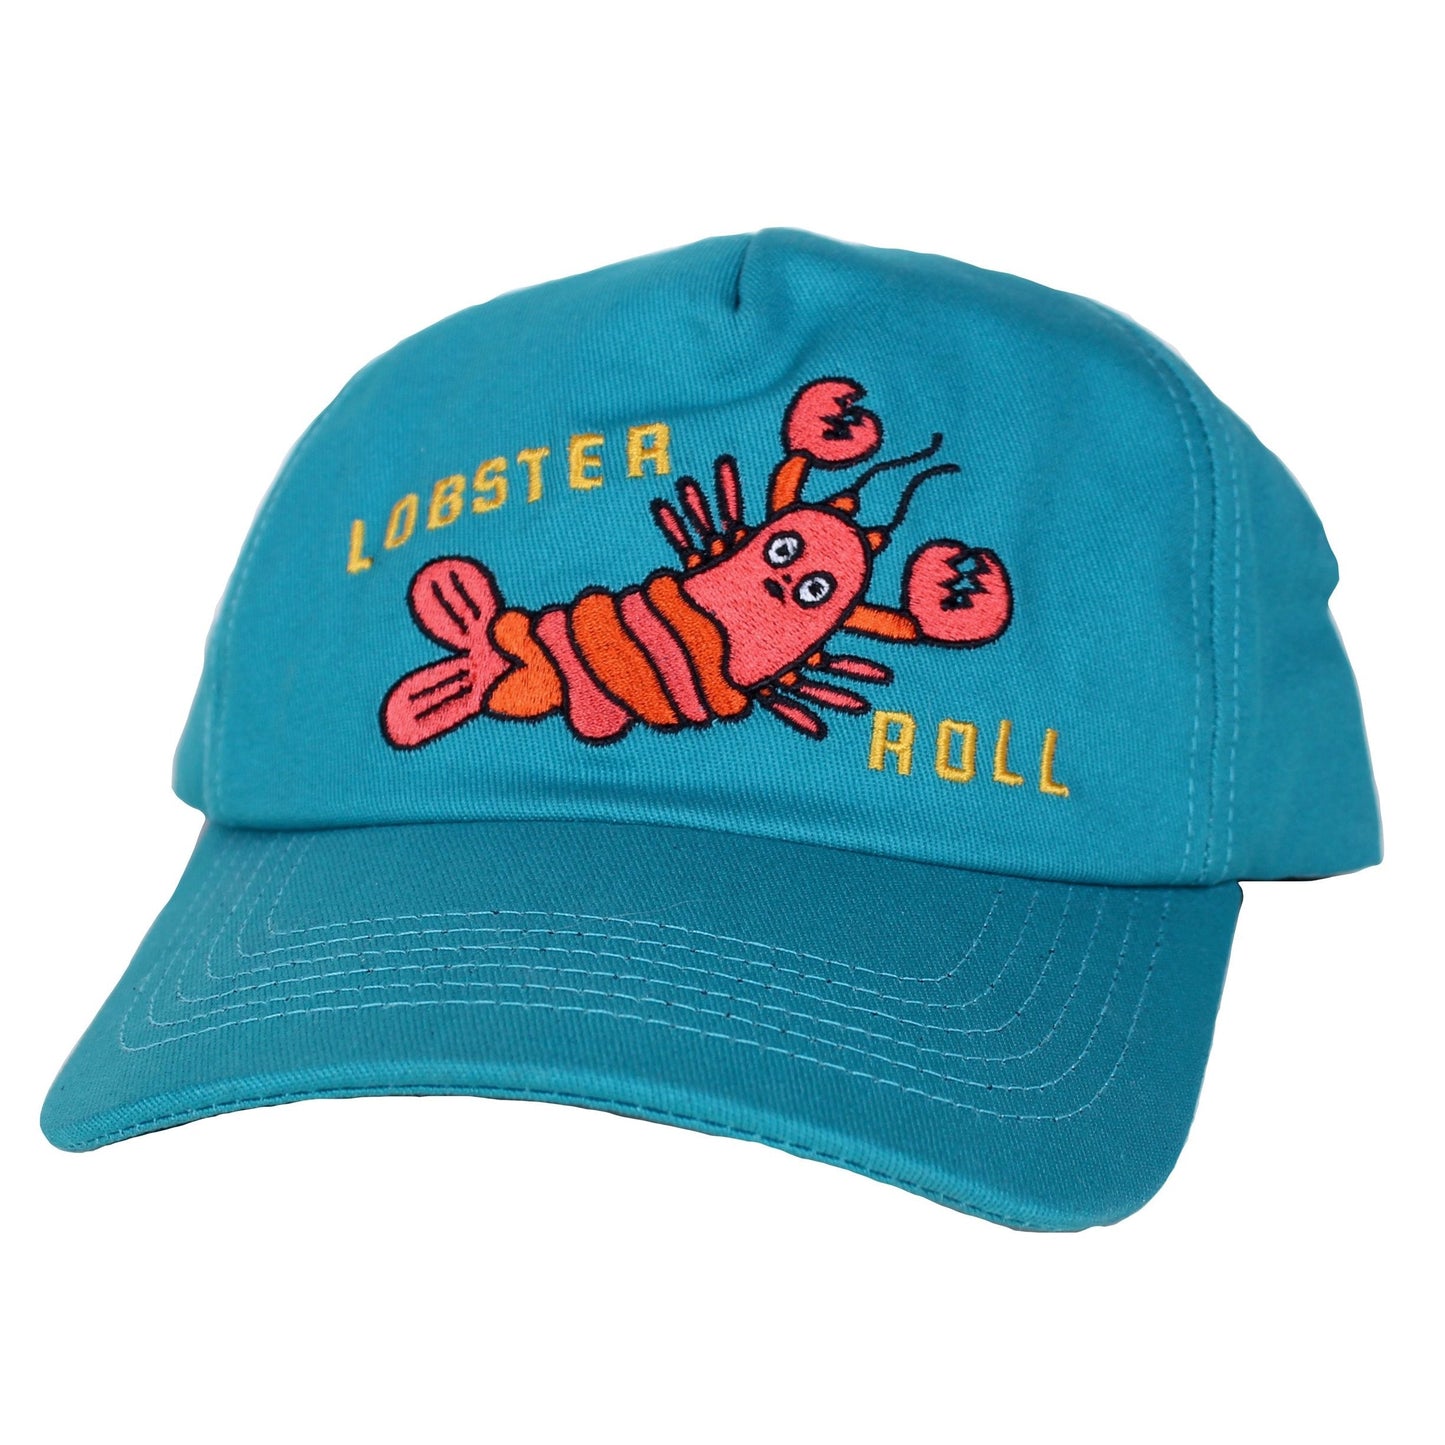 Blue dad hat with yellow embroidered text "Lobster Roll" and  design featuring a red lobster with big staring eyes. Front view with brim.